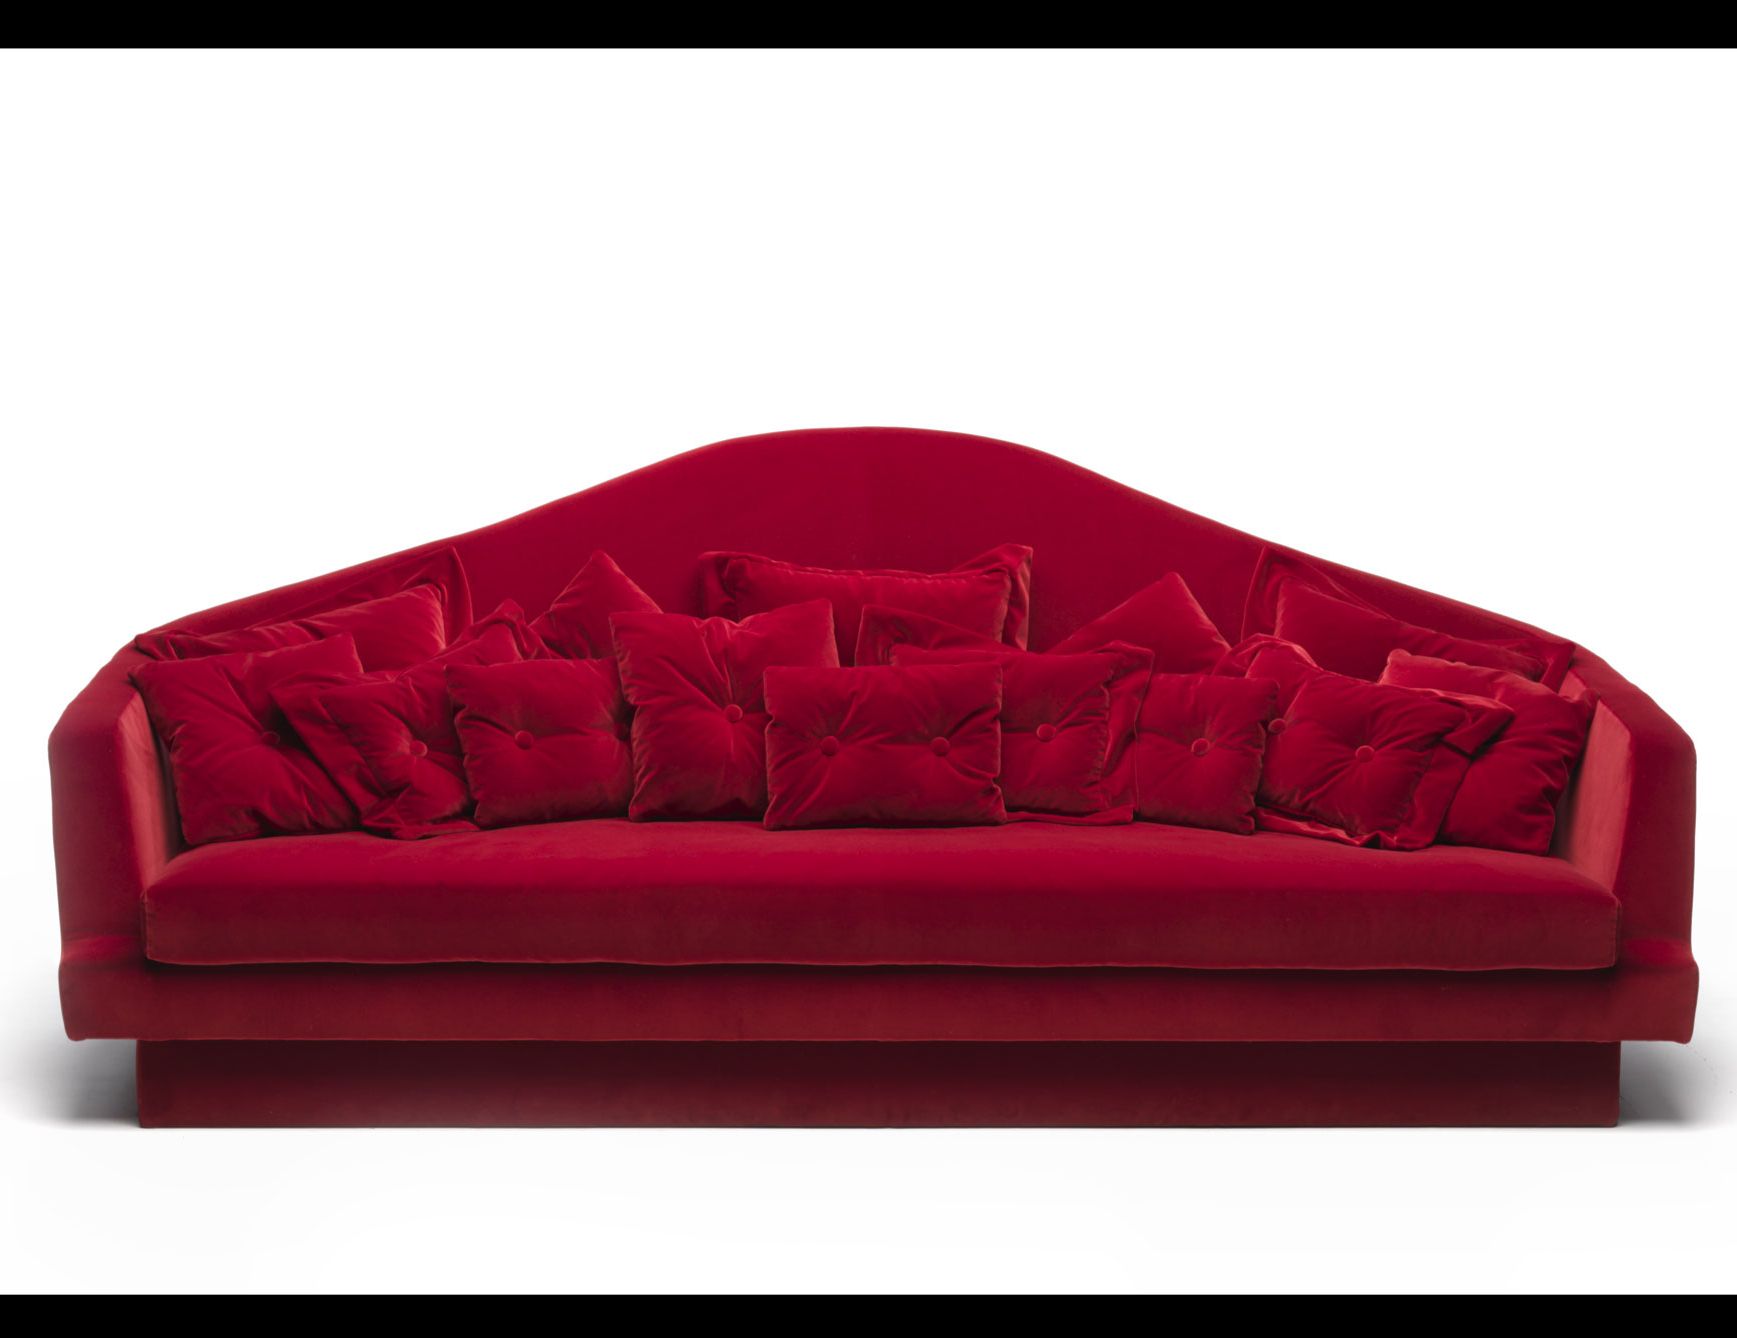 Nella Vetrina Red Carpet Luxury Italian Sofa Upholstered In Red Fabric Within Current Red Sofas And Chairs (View 4 of 20)